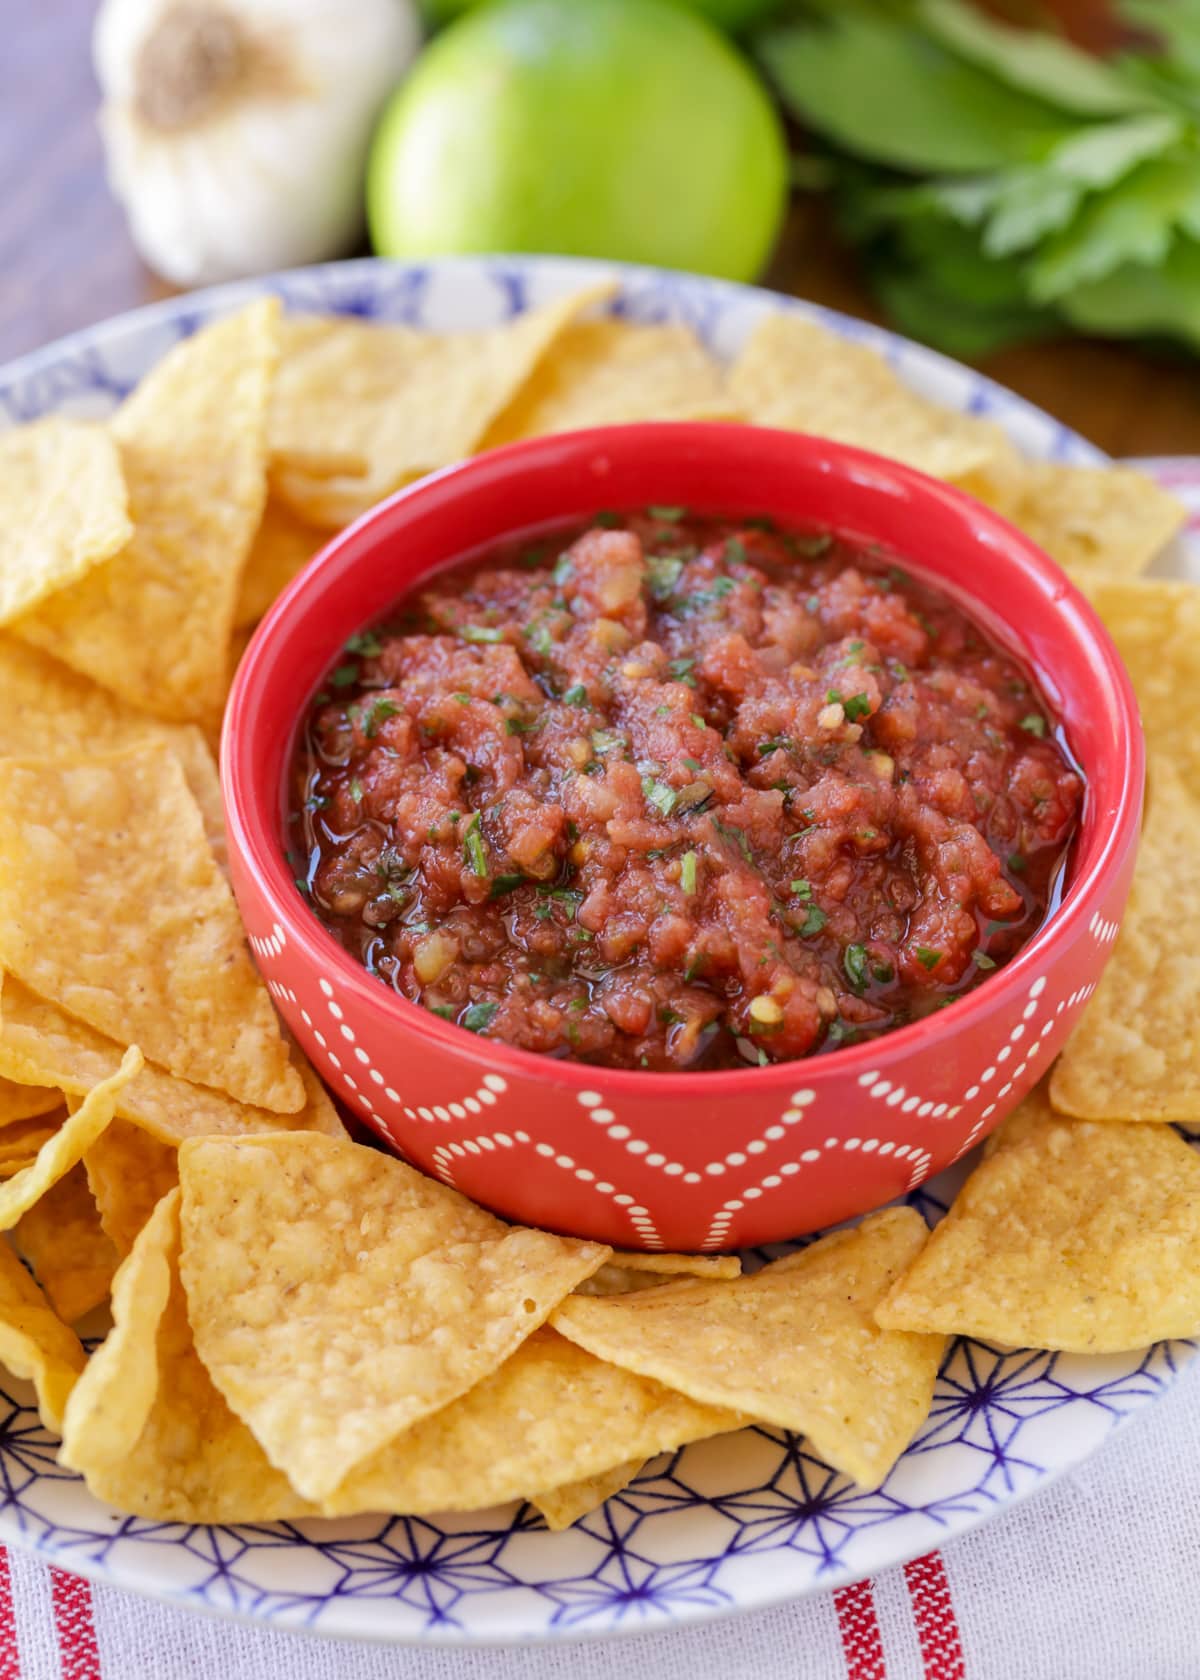 Easy homemade salsa recipe in small bowl on plate with tortilla chips.